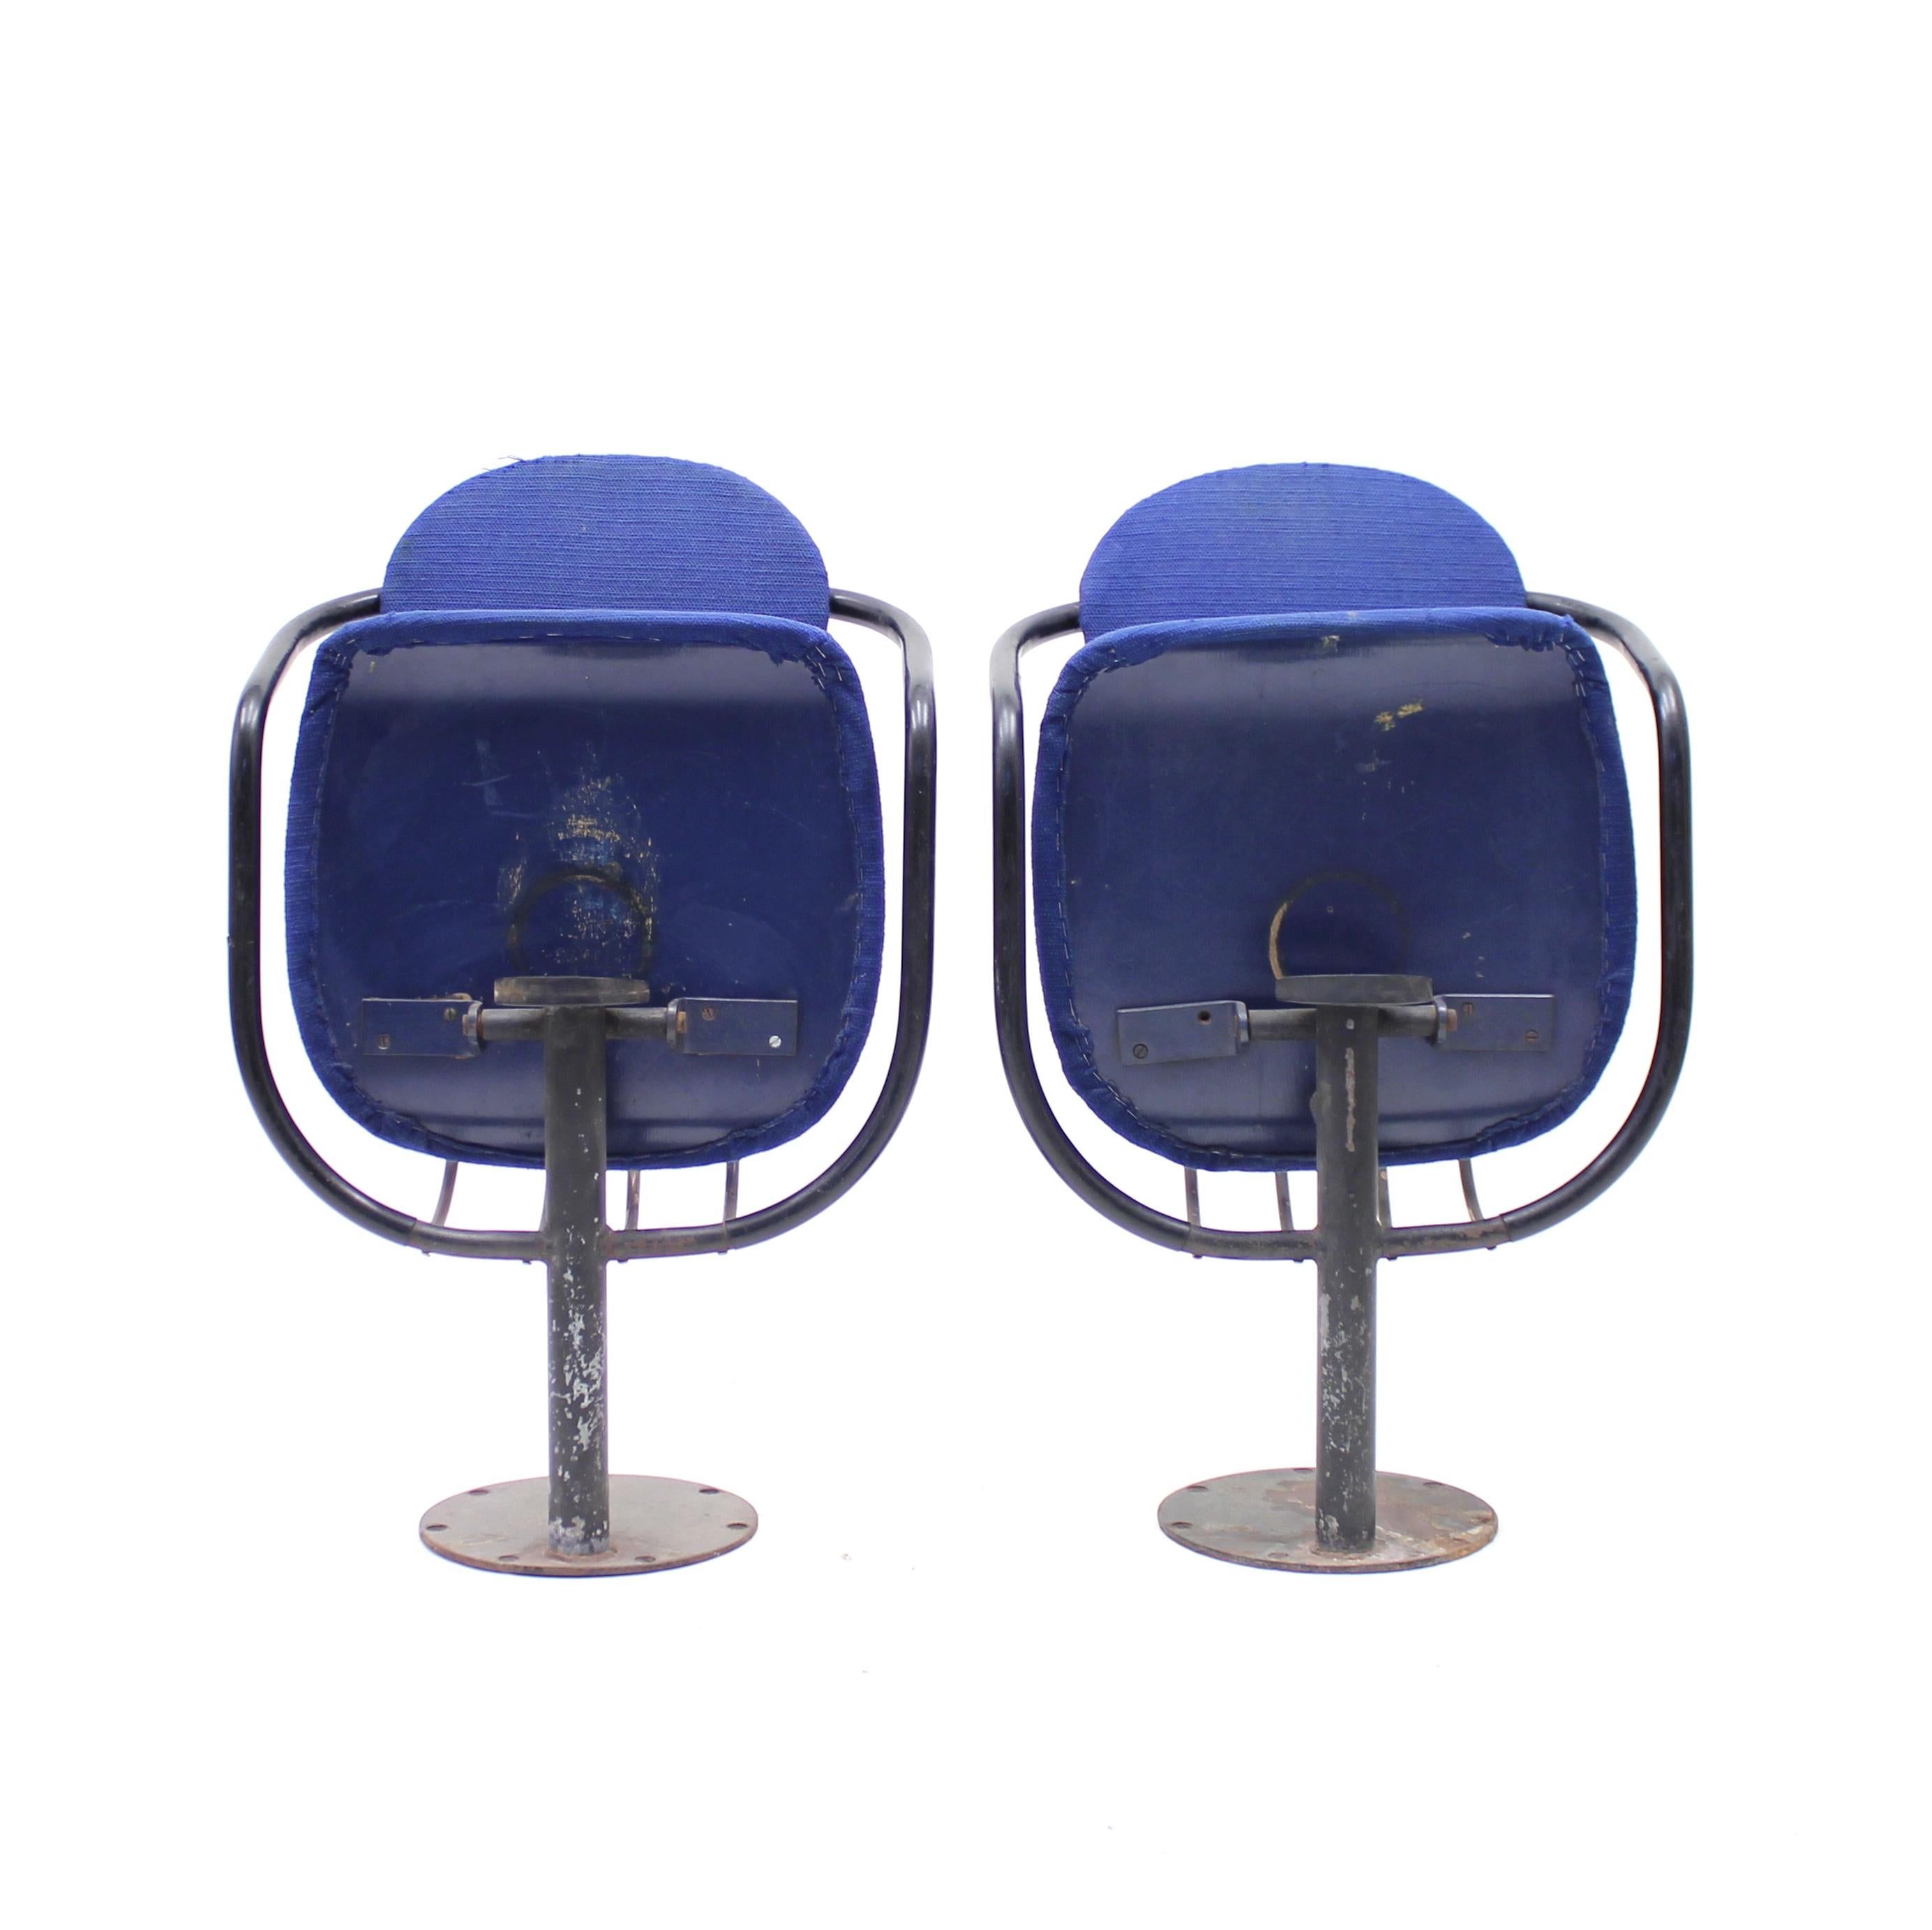 Poul Henningsen, Pair of Foldable Theatre Chairs for the Betty Nansen Theatre, 1 In Fair Condition For Sale In Uppsala, SE